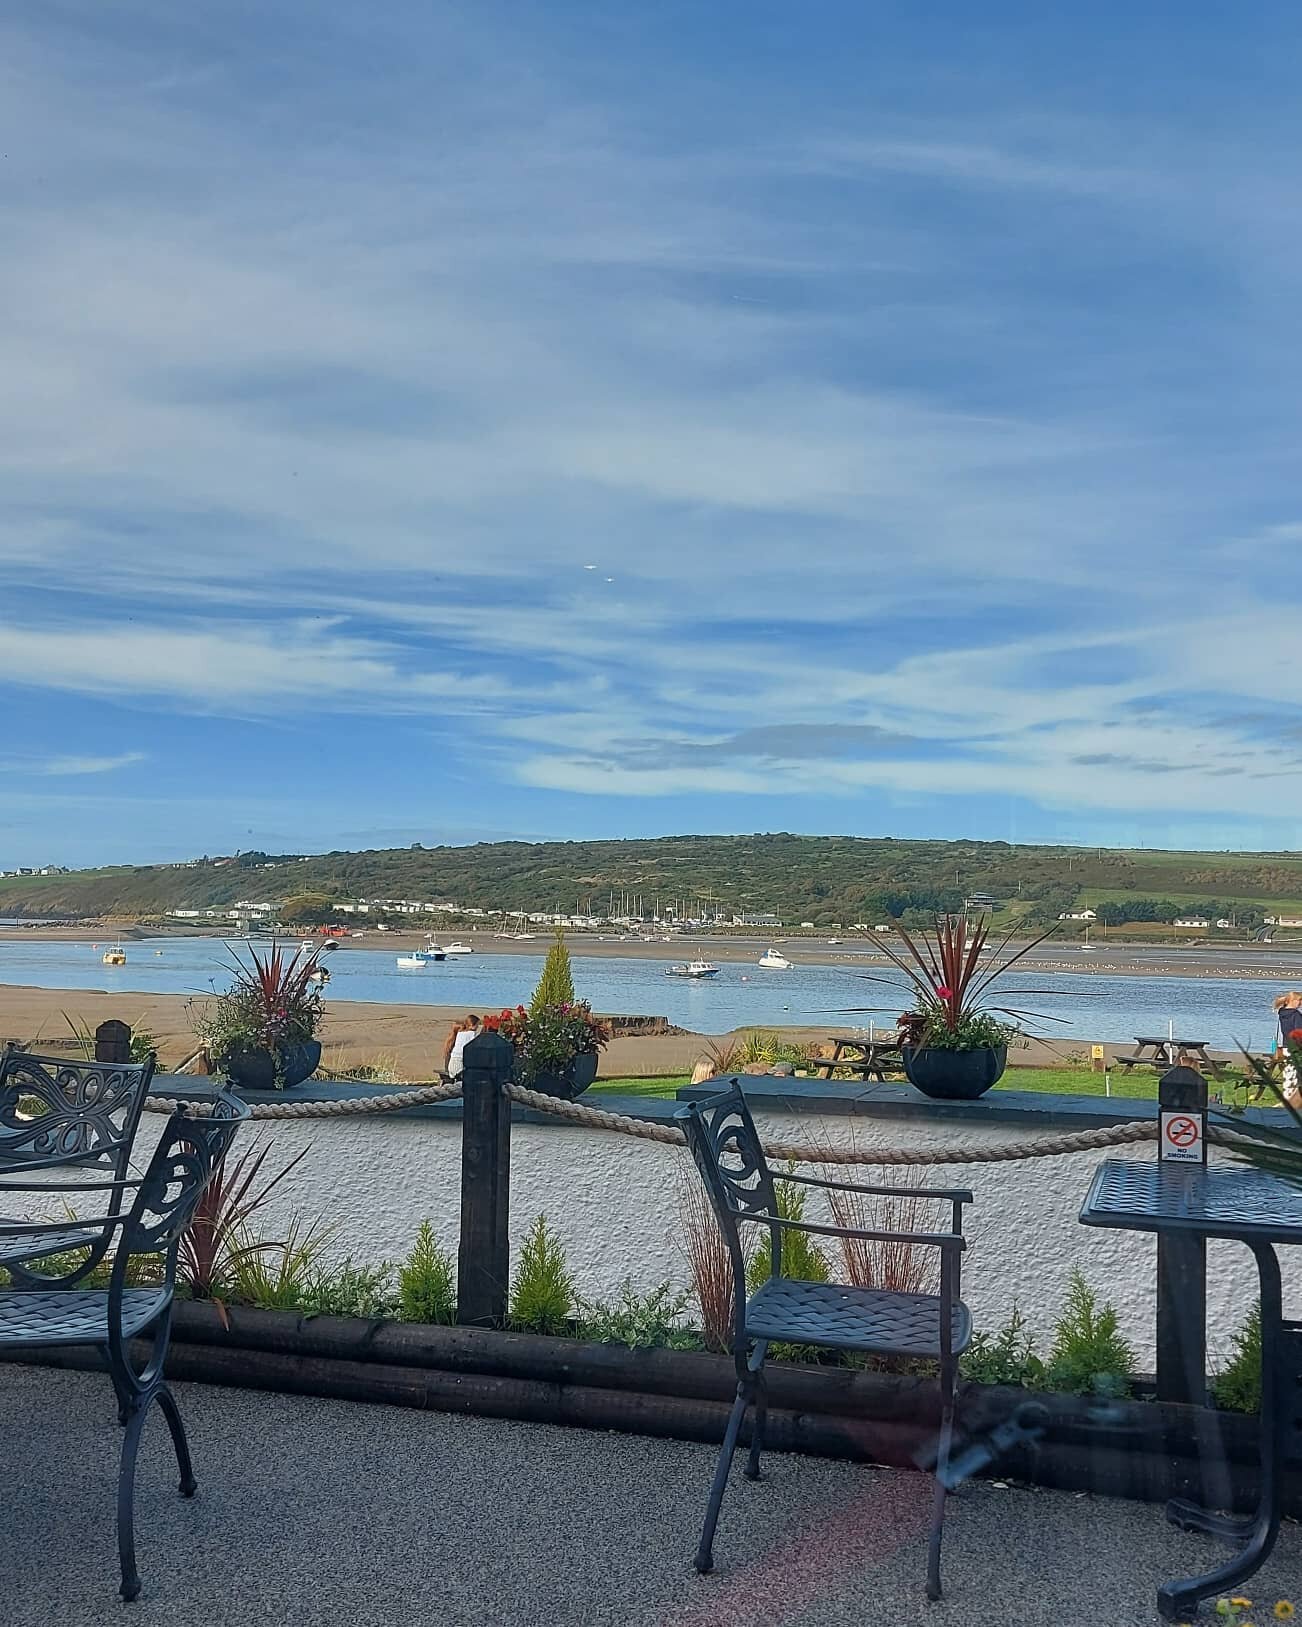 ⚓DINNER OUT⚓⁣
⁣
Last night we went to the @teifi_waterside_hotel for the first time and enjoyed great food, a lovely welcome &amp; beautiful views over the Teifi Estuary 💙⁣
⁣
Afterwards we took a stroll along the estuary and our little one enjoyed p